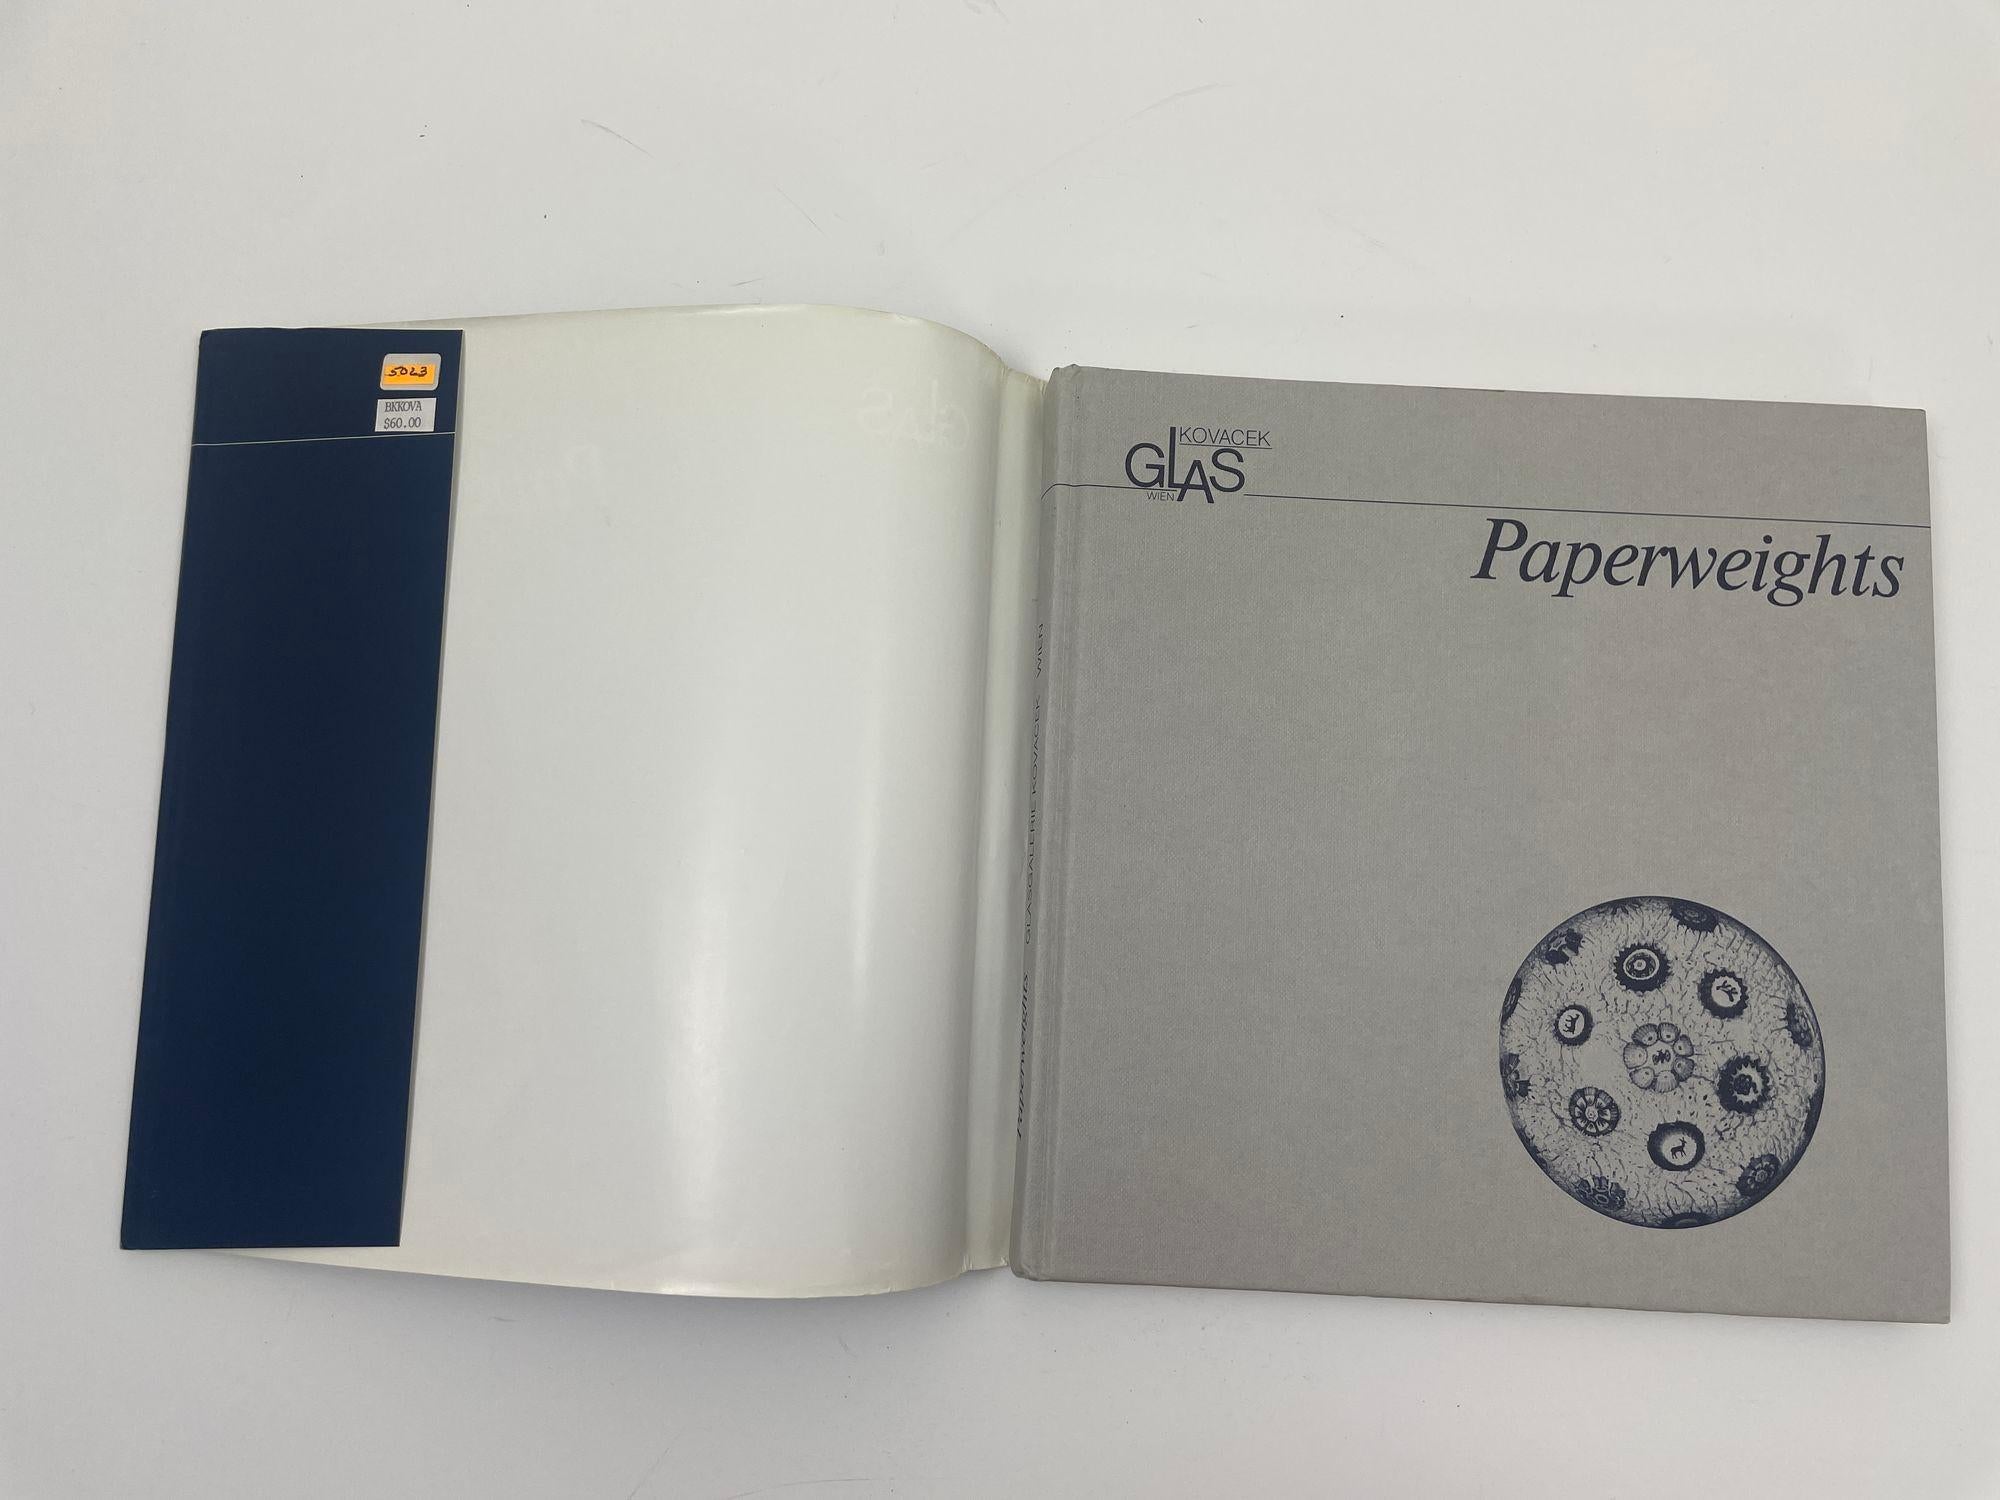 Paperweights Glass Gallery Michael Kovacek Vienna 1987 Hardcover Reference Book In Good Condition For Sale In North Hollywood, CA